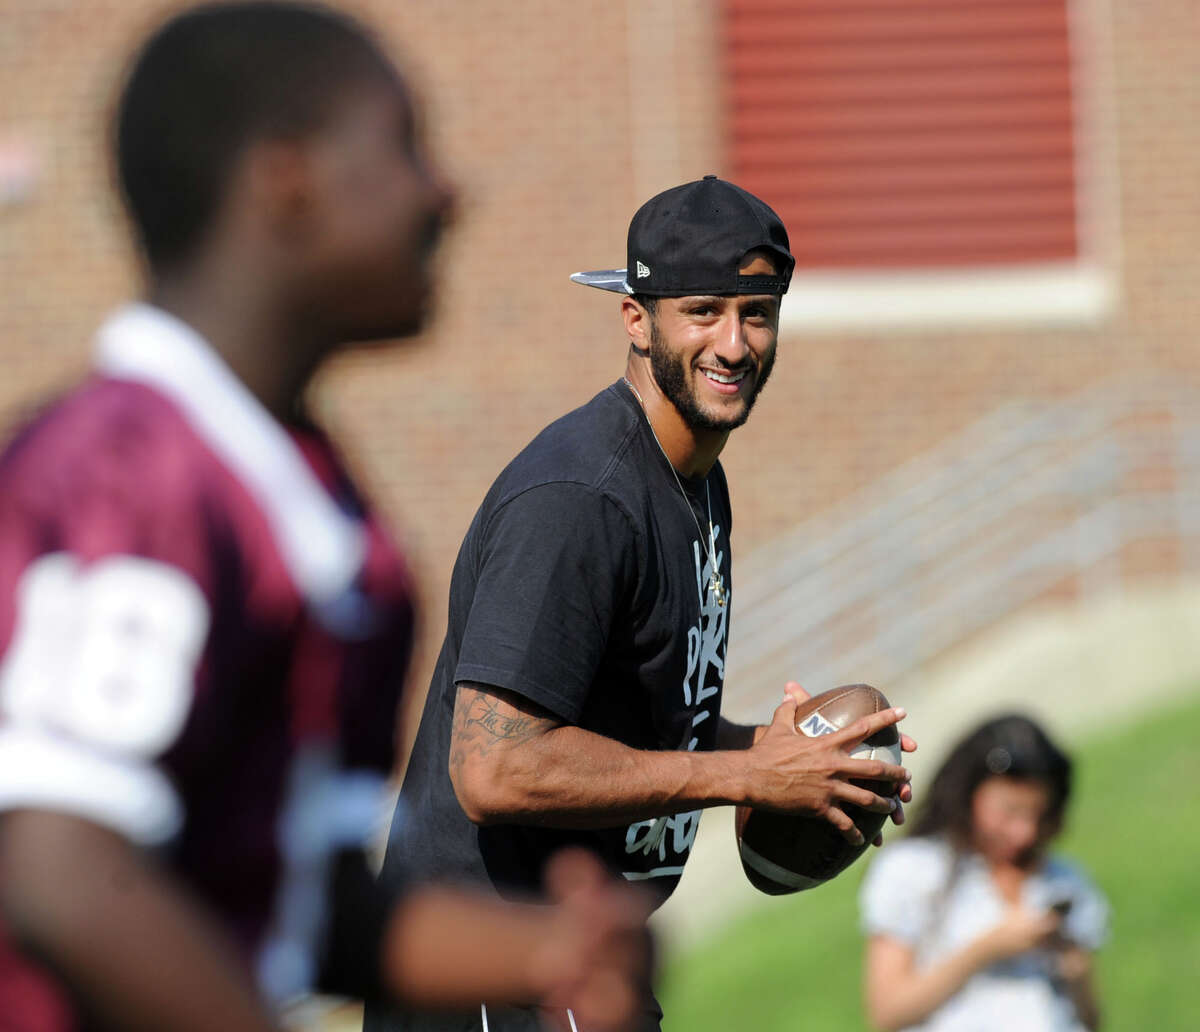 San Francisco 49ers quarterback Colin Kaepernick during his visit to the St. Luke's School in New Canaan, Conn., Saturday afternoon, July 12, 2014. Kaepernick visited the school on behalf of the Children of Fallen Patriots Foundation that provides college scholarships and educational counseling to military children who have lost a parent in the line of duty. The foundation was founded by husband and wife, David and Cynthia Kim of Greenwich.